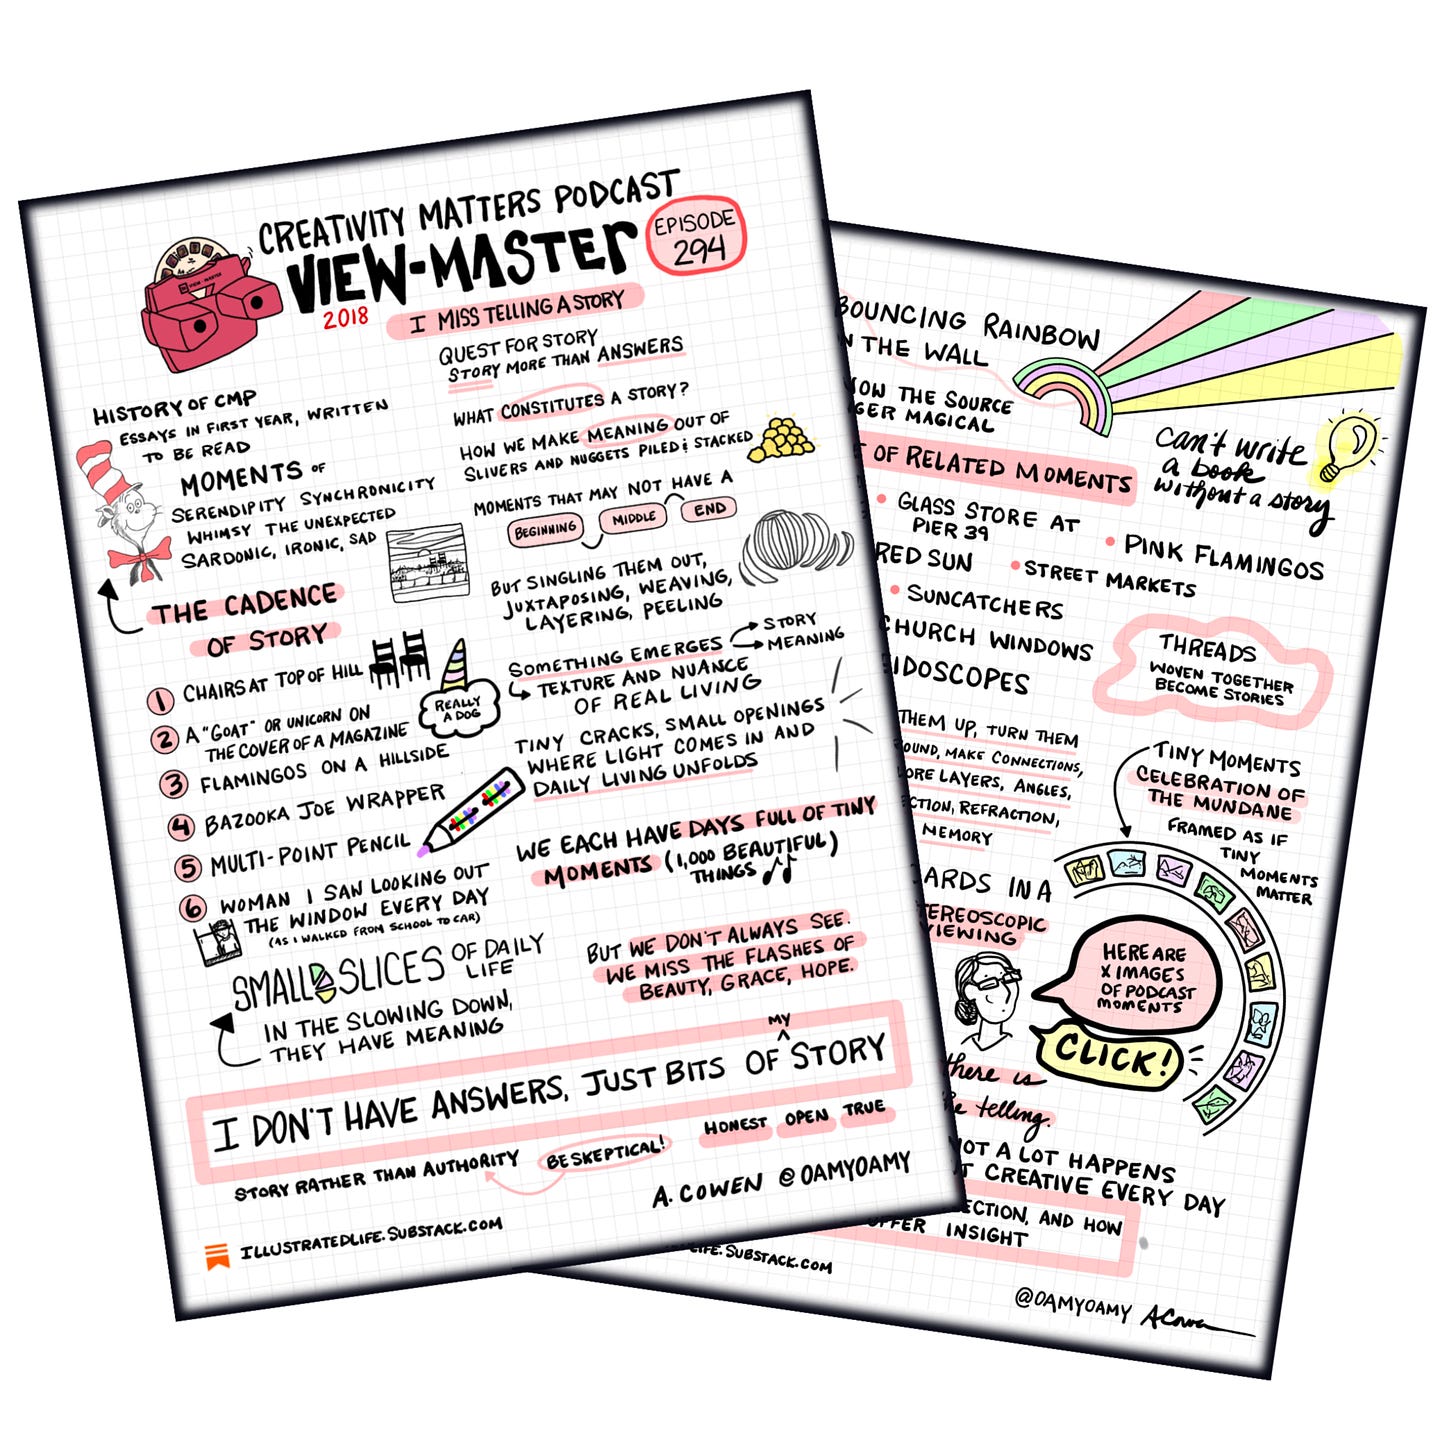 Stacked look at Sketchnote of EP 297 of Creativity Matters Podcast